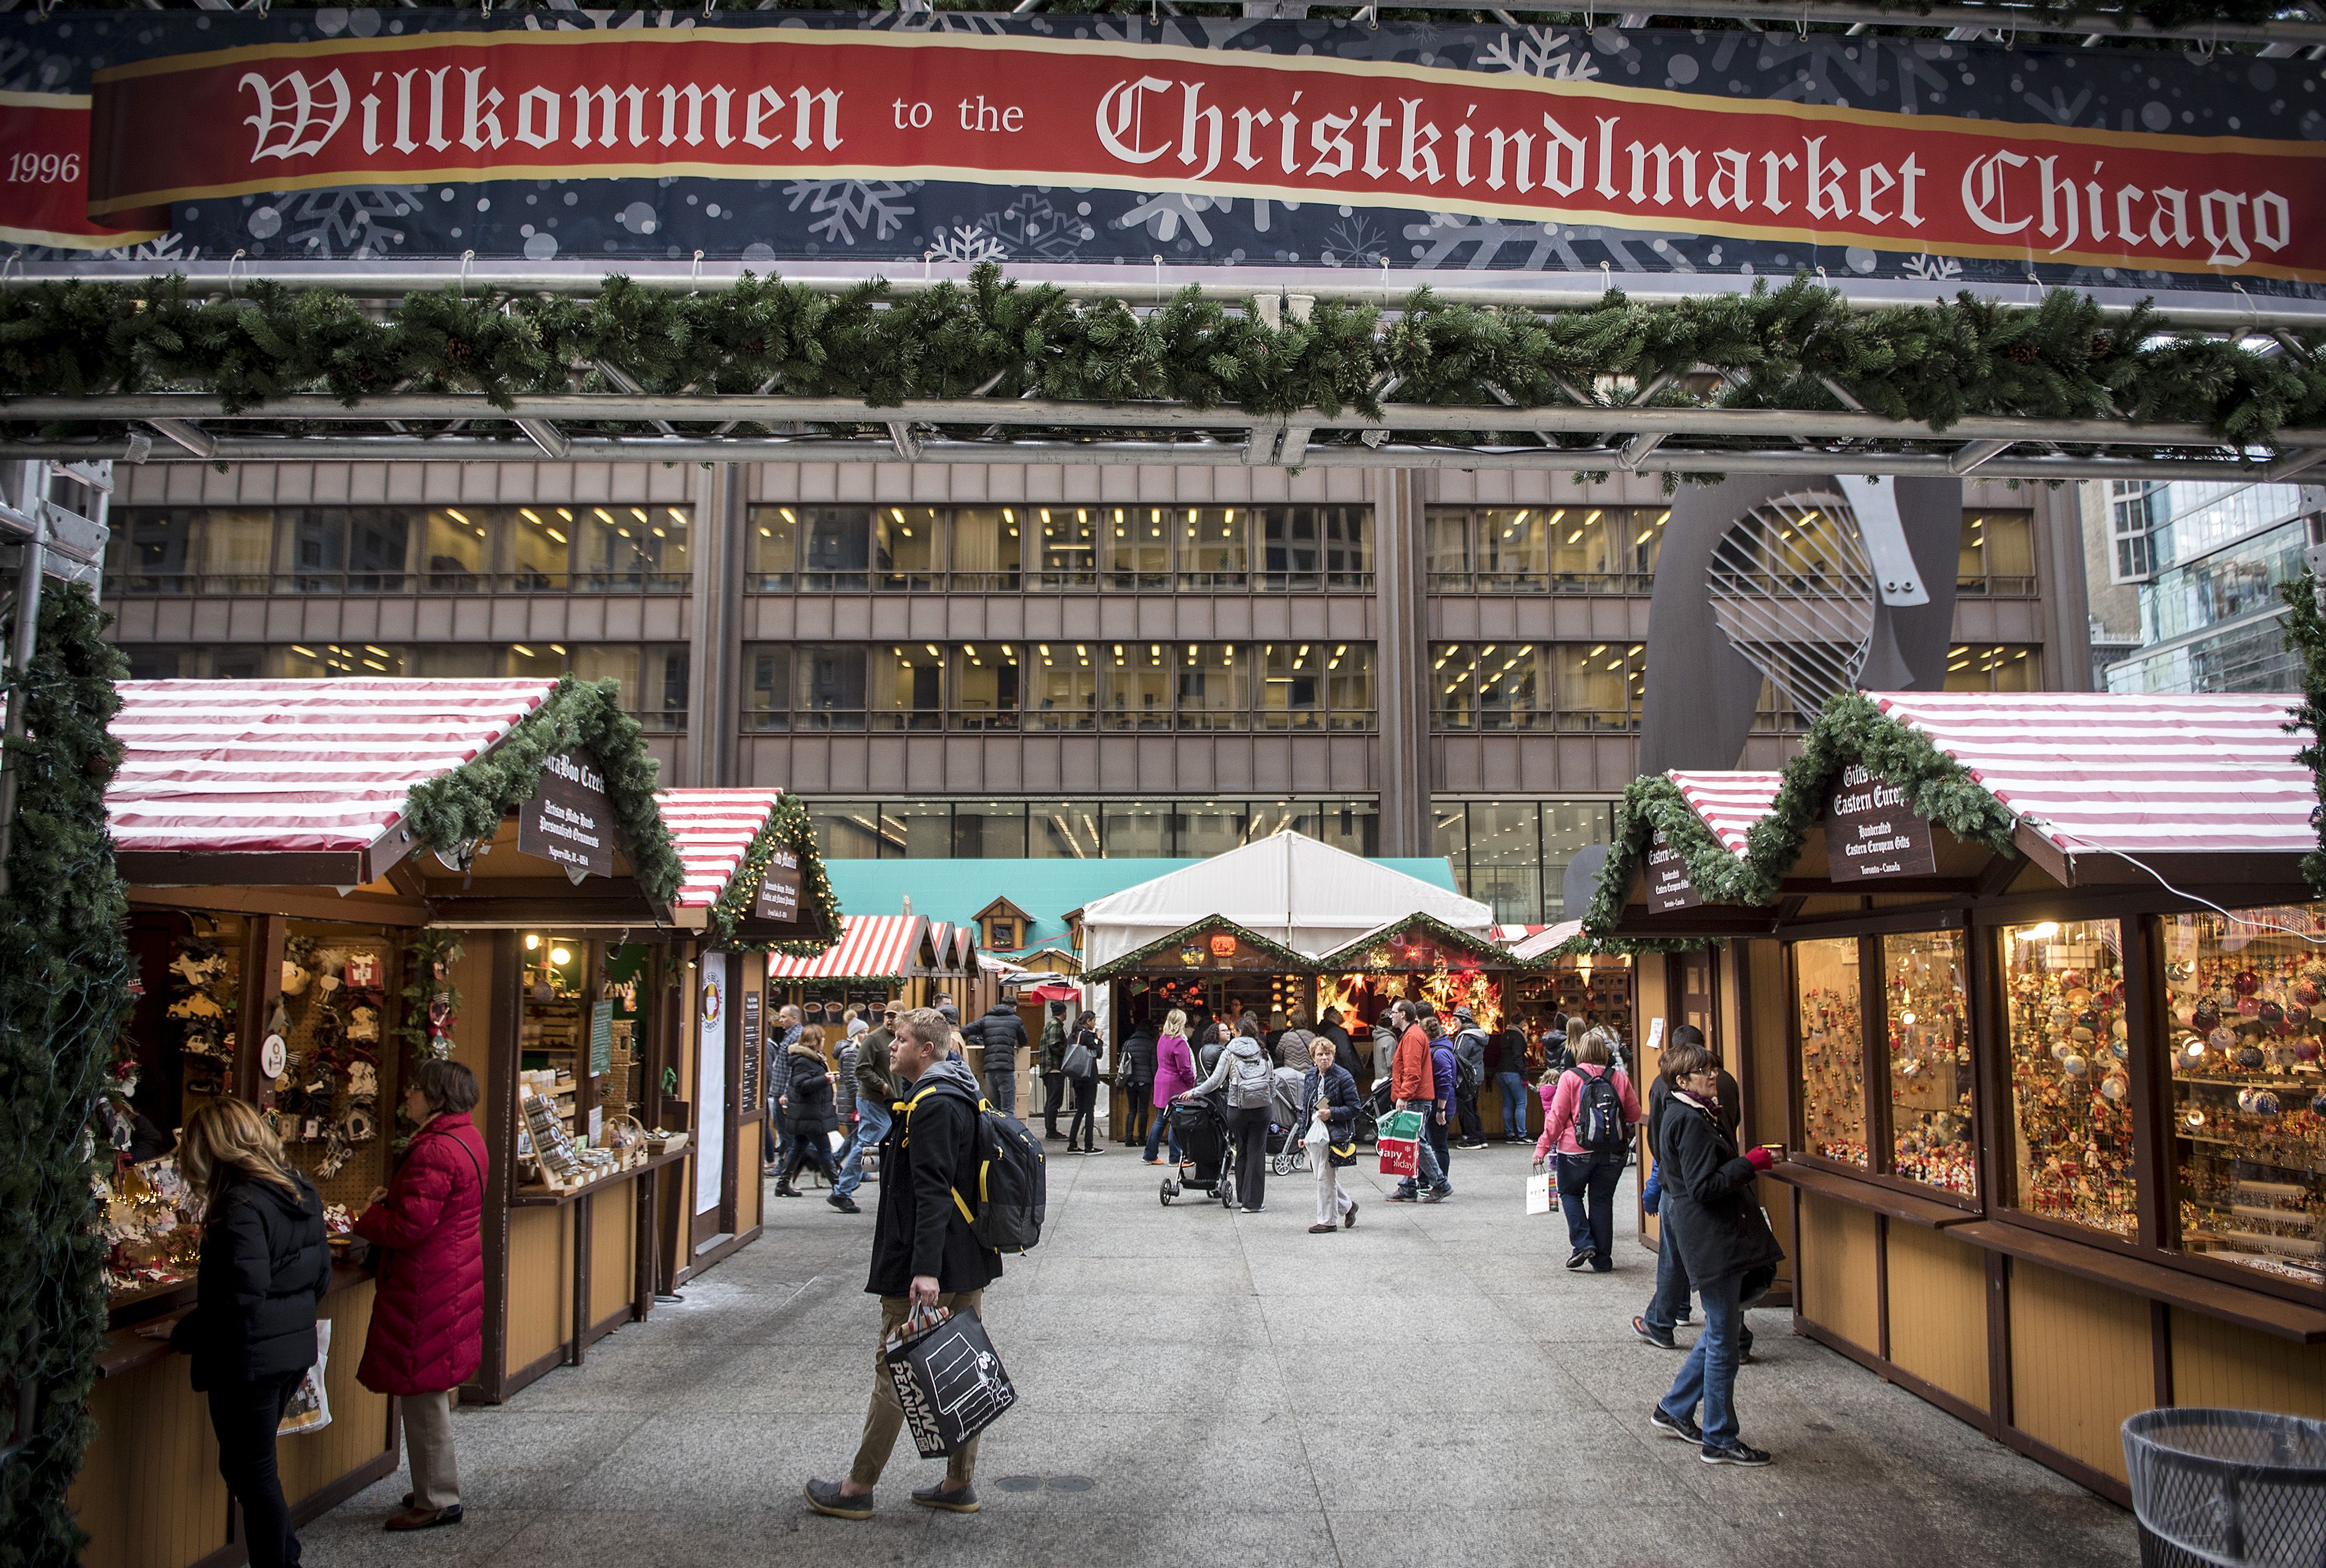 The Christkindlmarket Chicago 2017. Photo: Christopher Dilts / Bloomberg via Getty Images